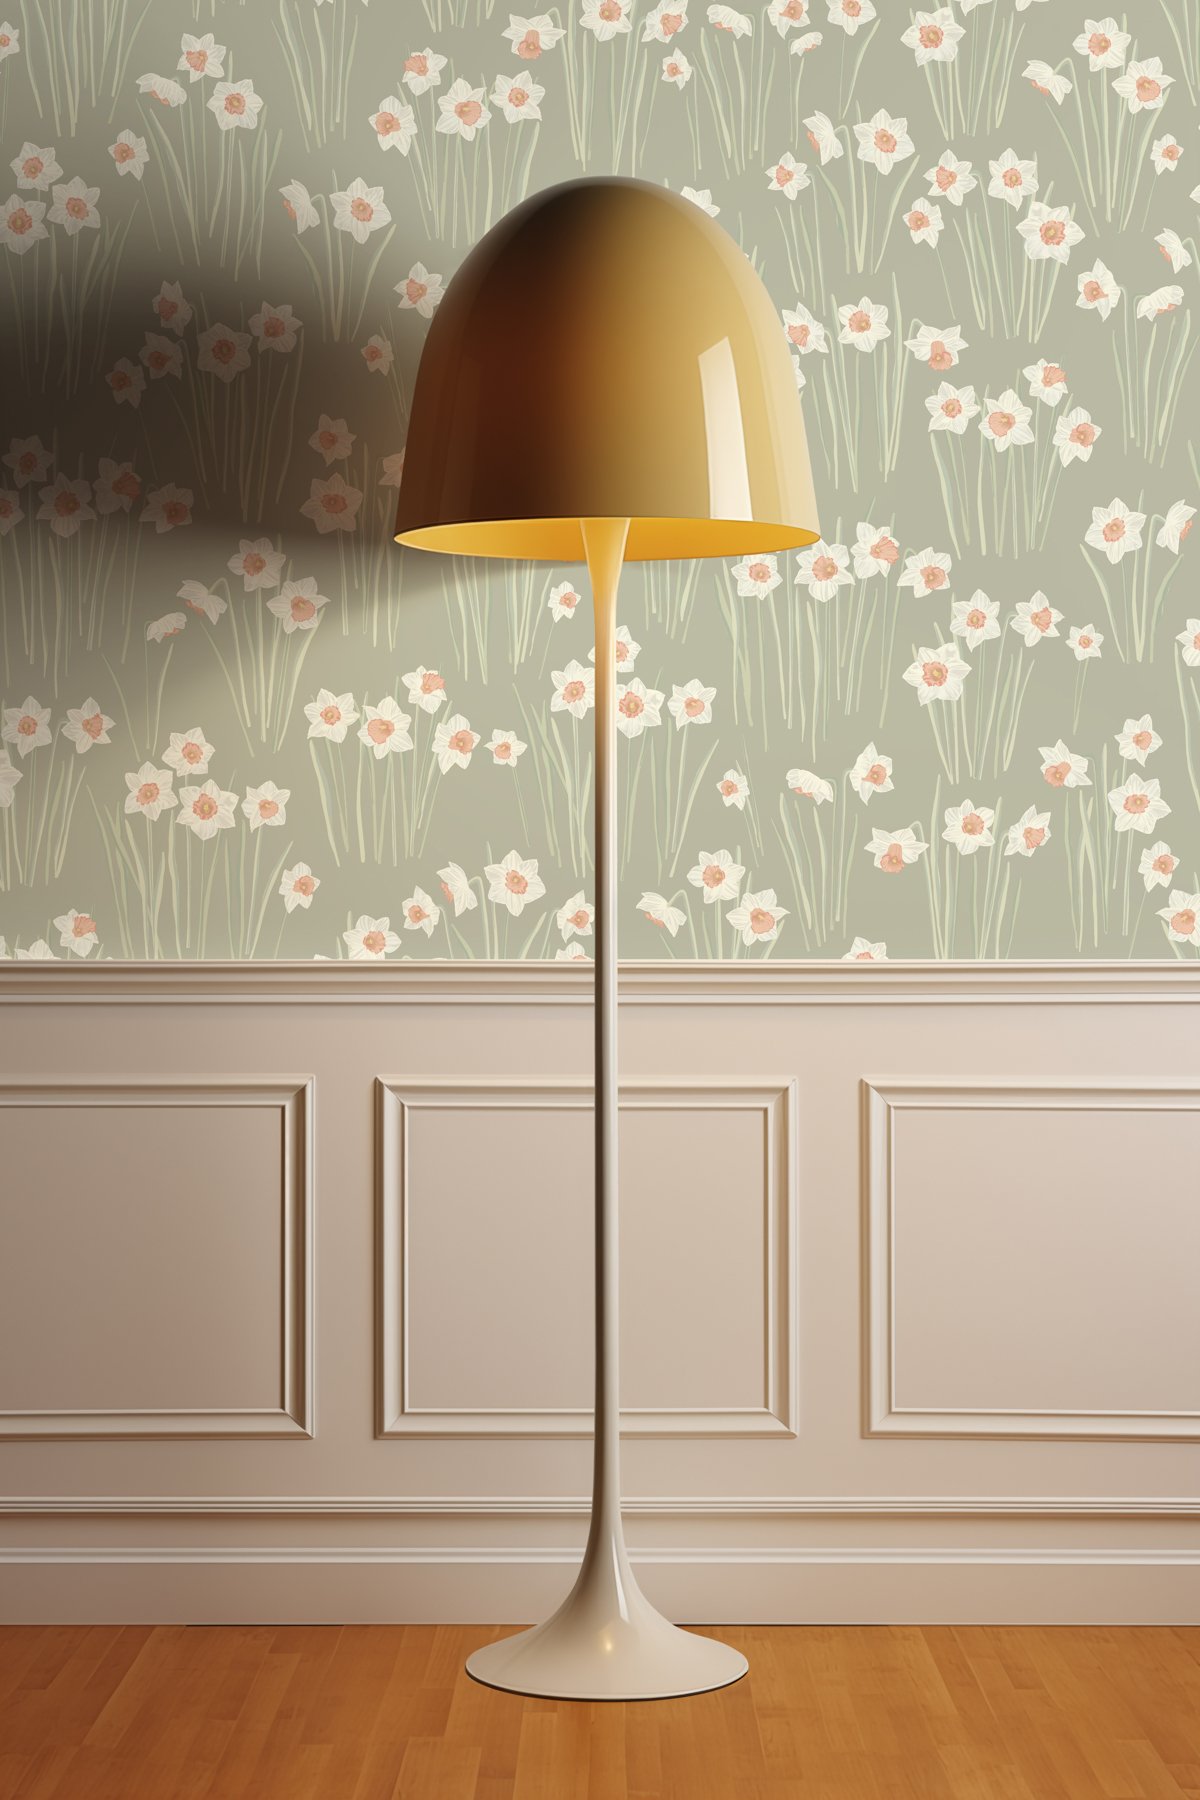 Kate Golding Daffodil (Sage Green) Wallpaper.  Modern wallcoverings and interior decor.  